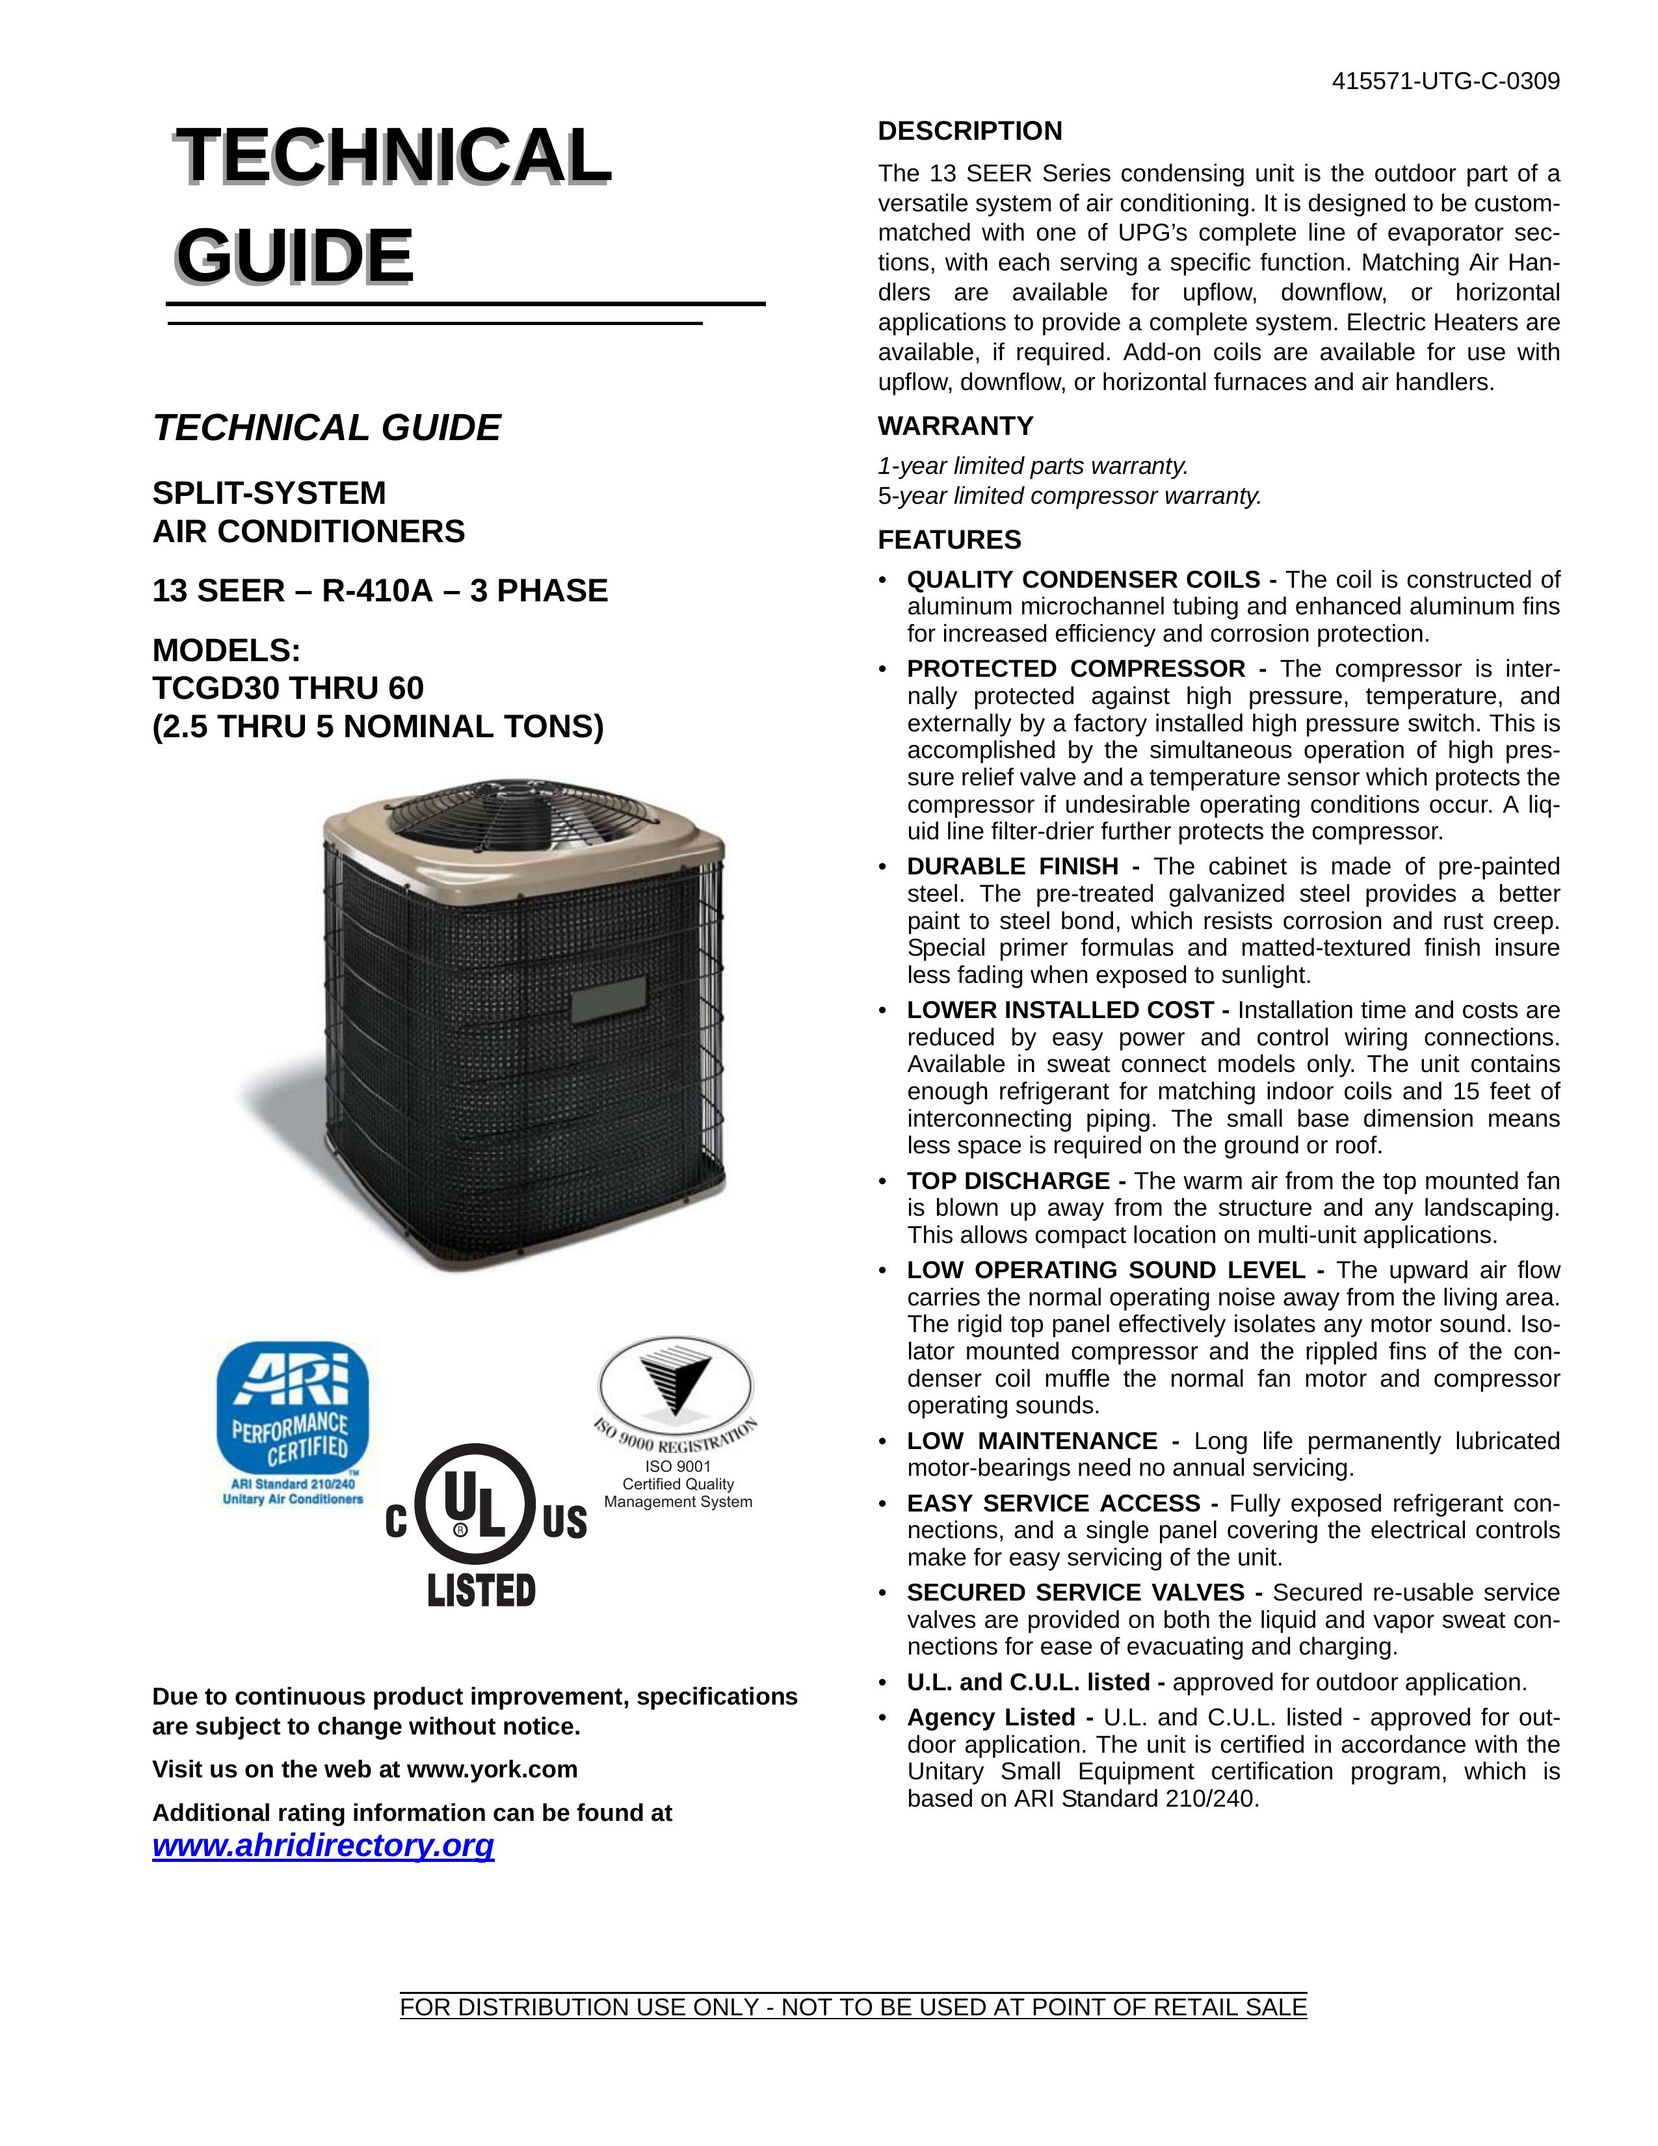 Johnson Controls TCGD30 Air Conditioner User Manual